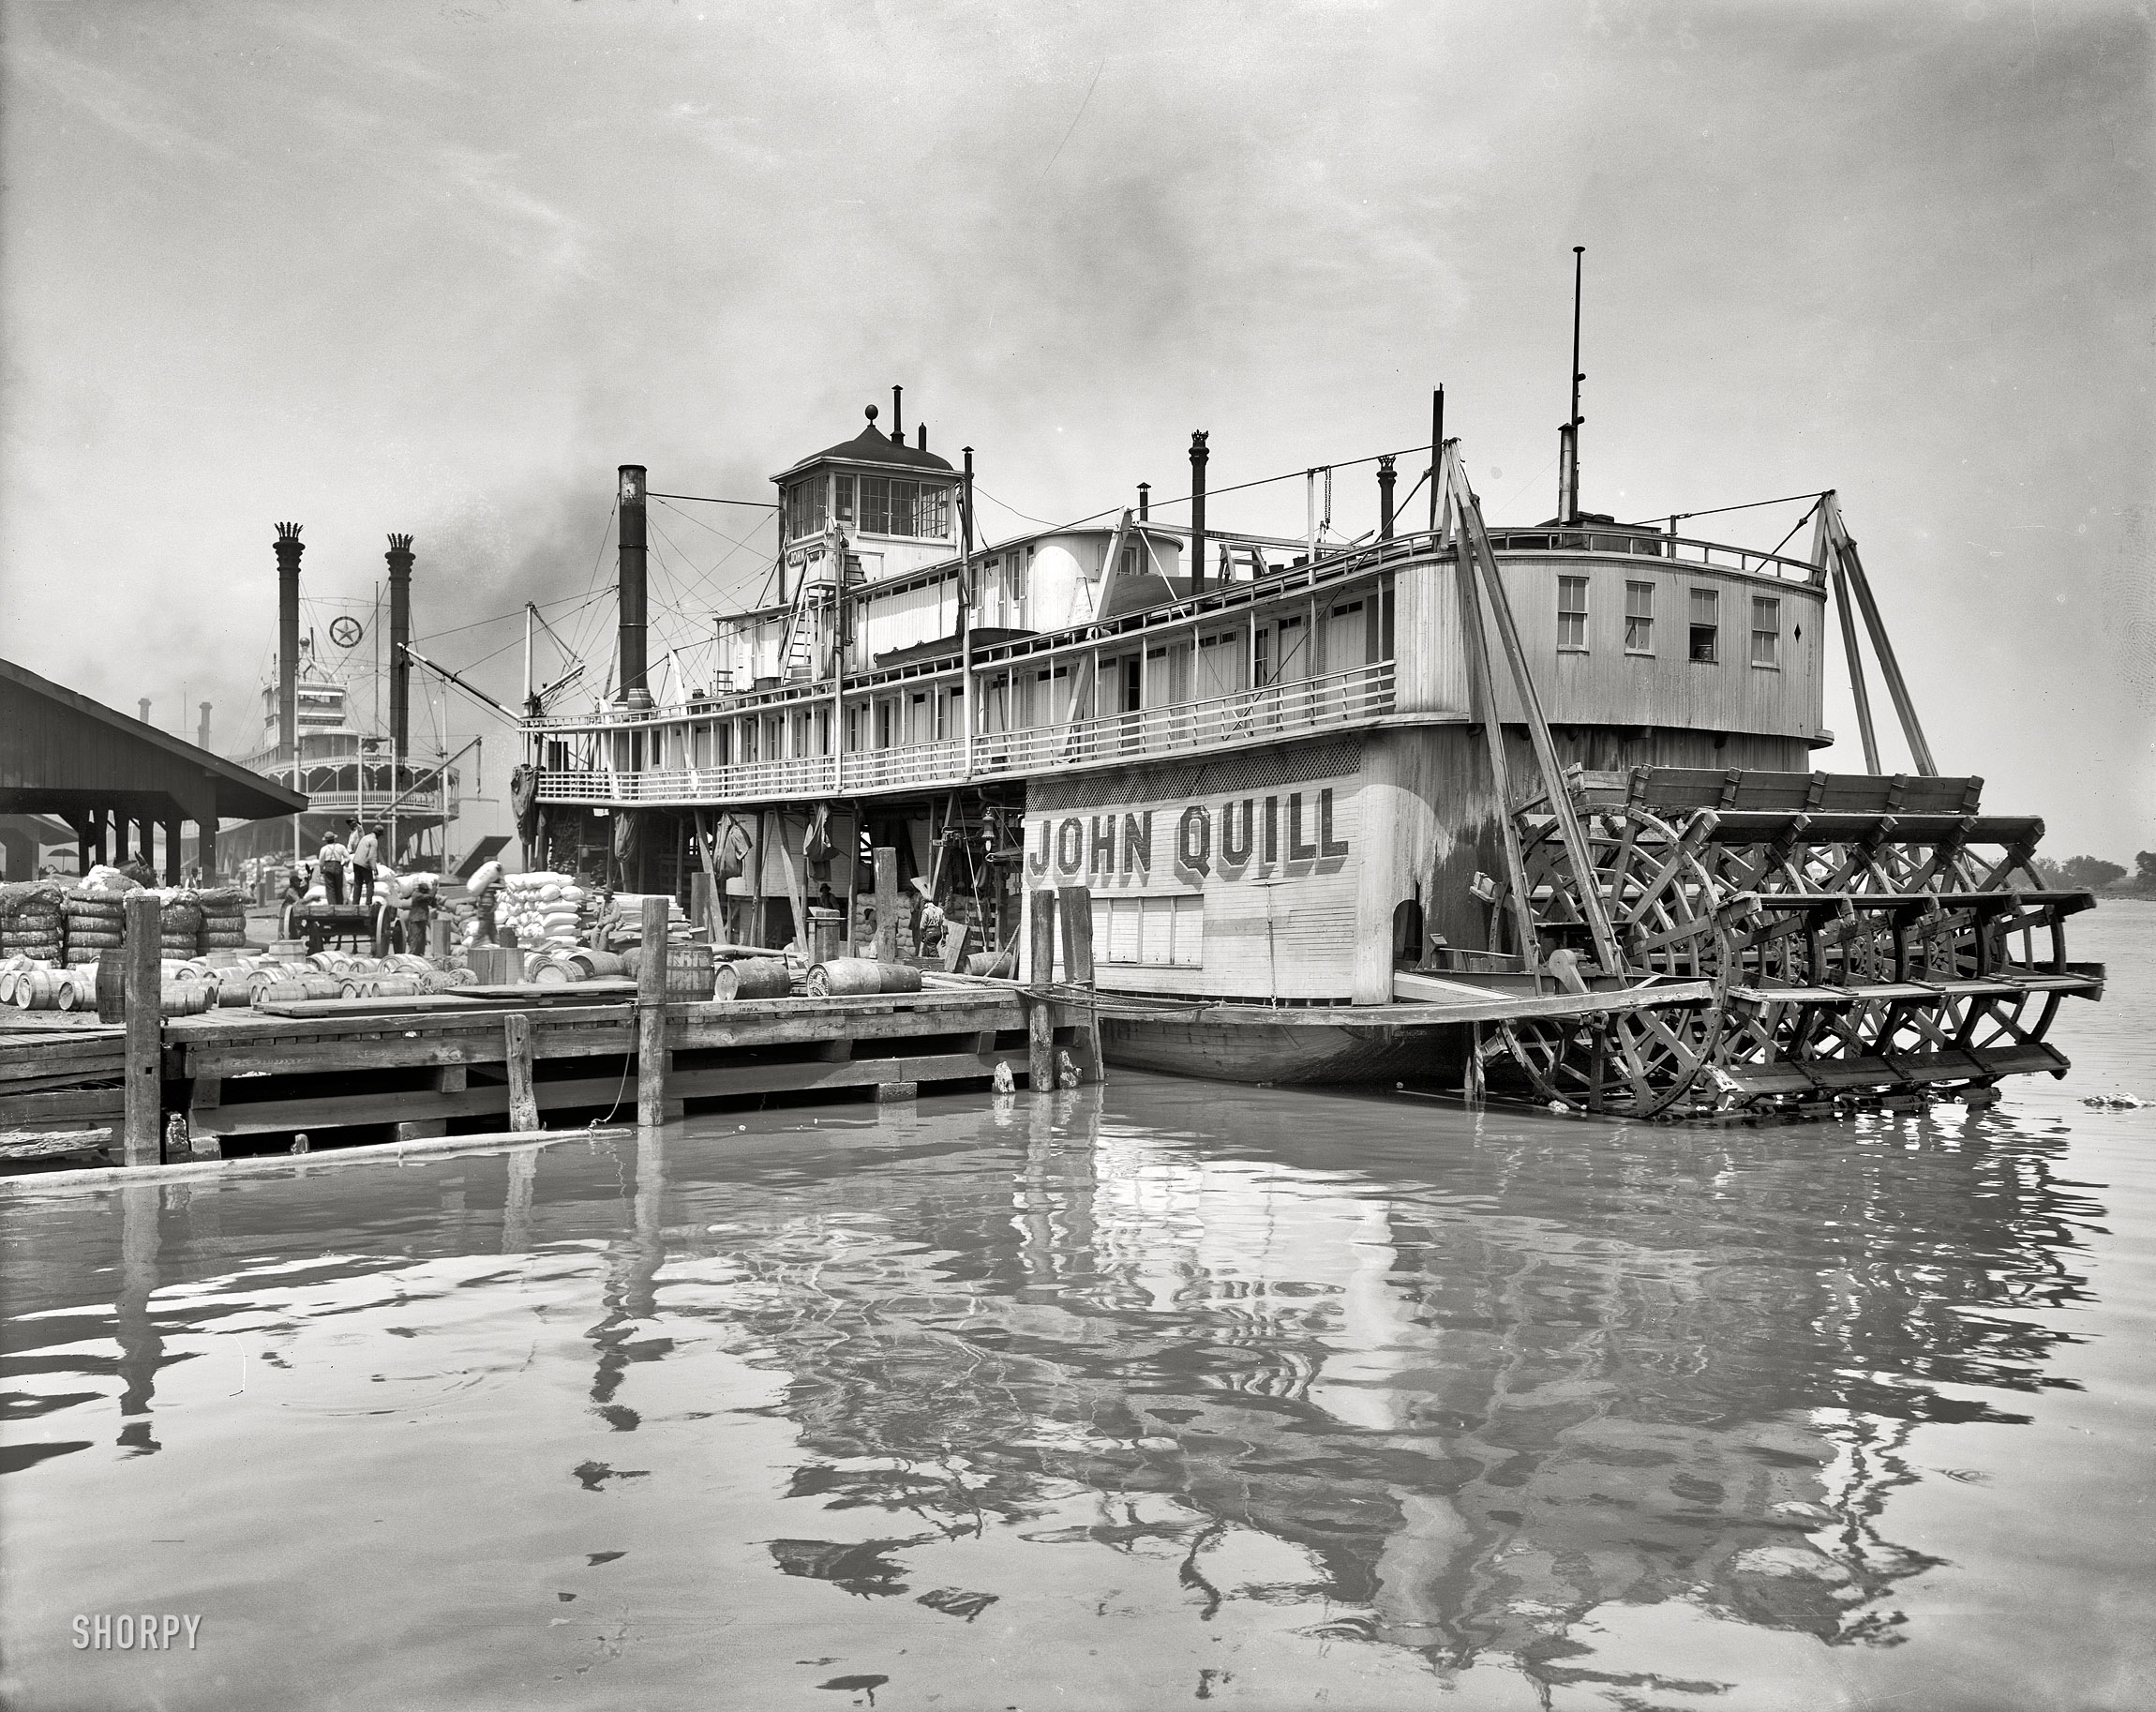 Circa 1910. "Sternwheeler John Quill, packet steamer." 8x10 inch dry plate glass negative, Detroit Publishing Company. View full size.